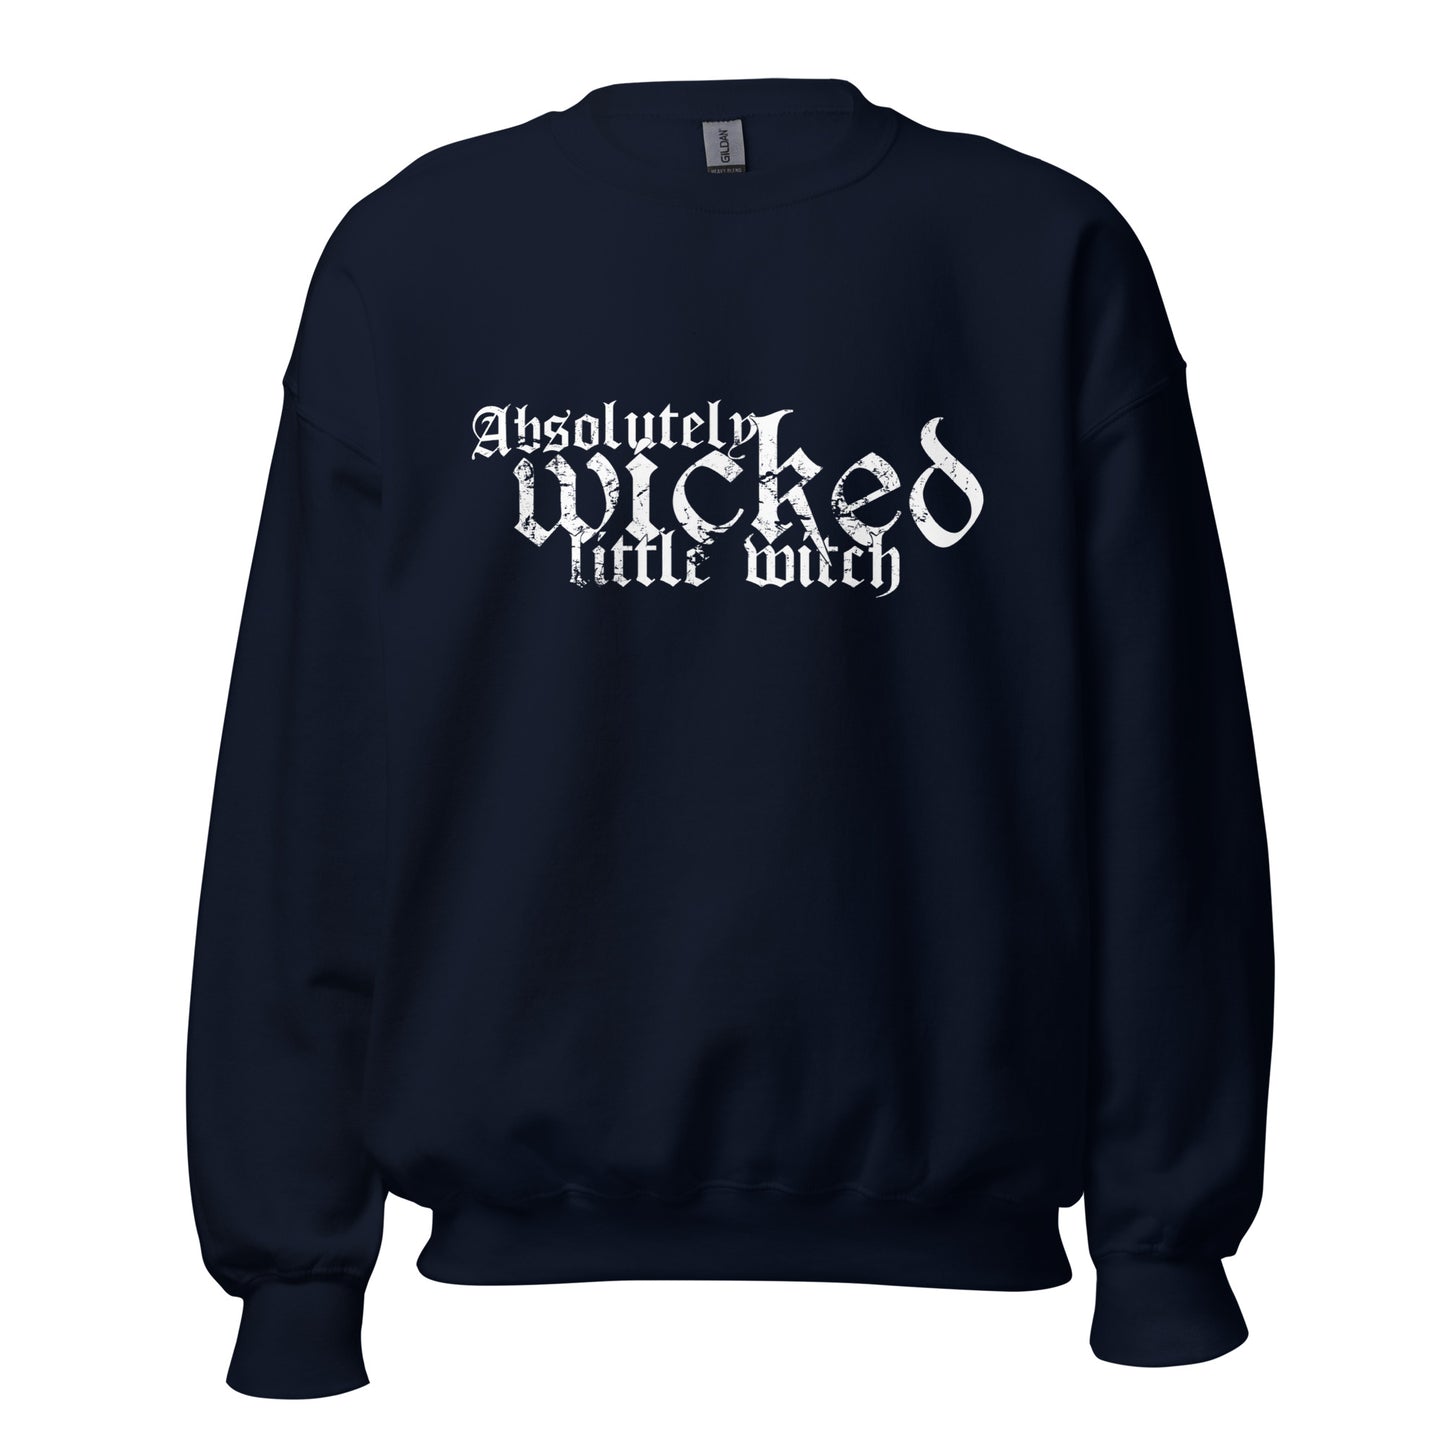 Absolutely Wicked Little Witch Crewneck - White Decal - Licensed